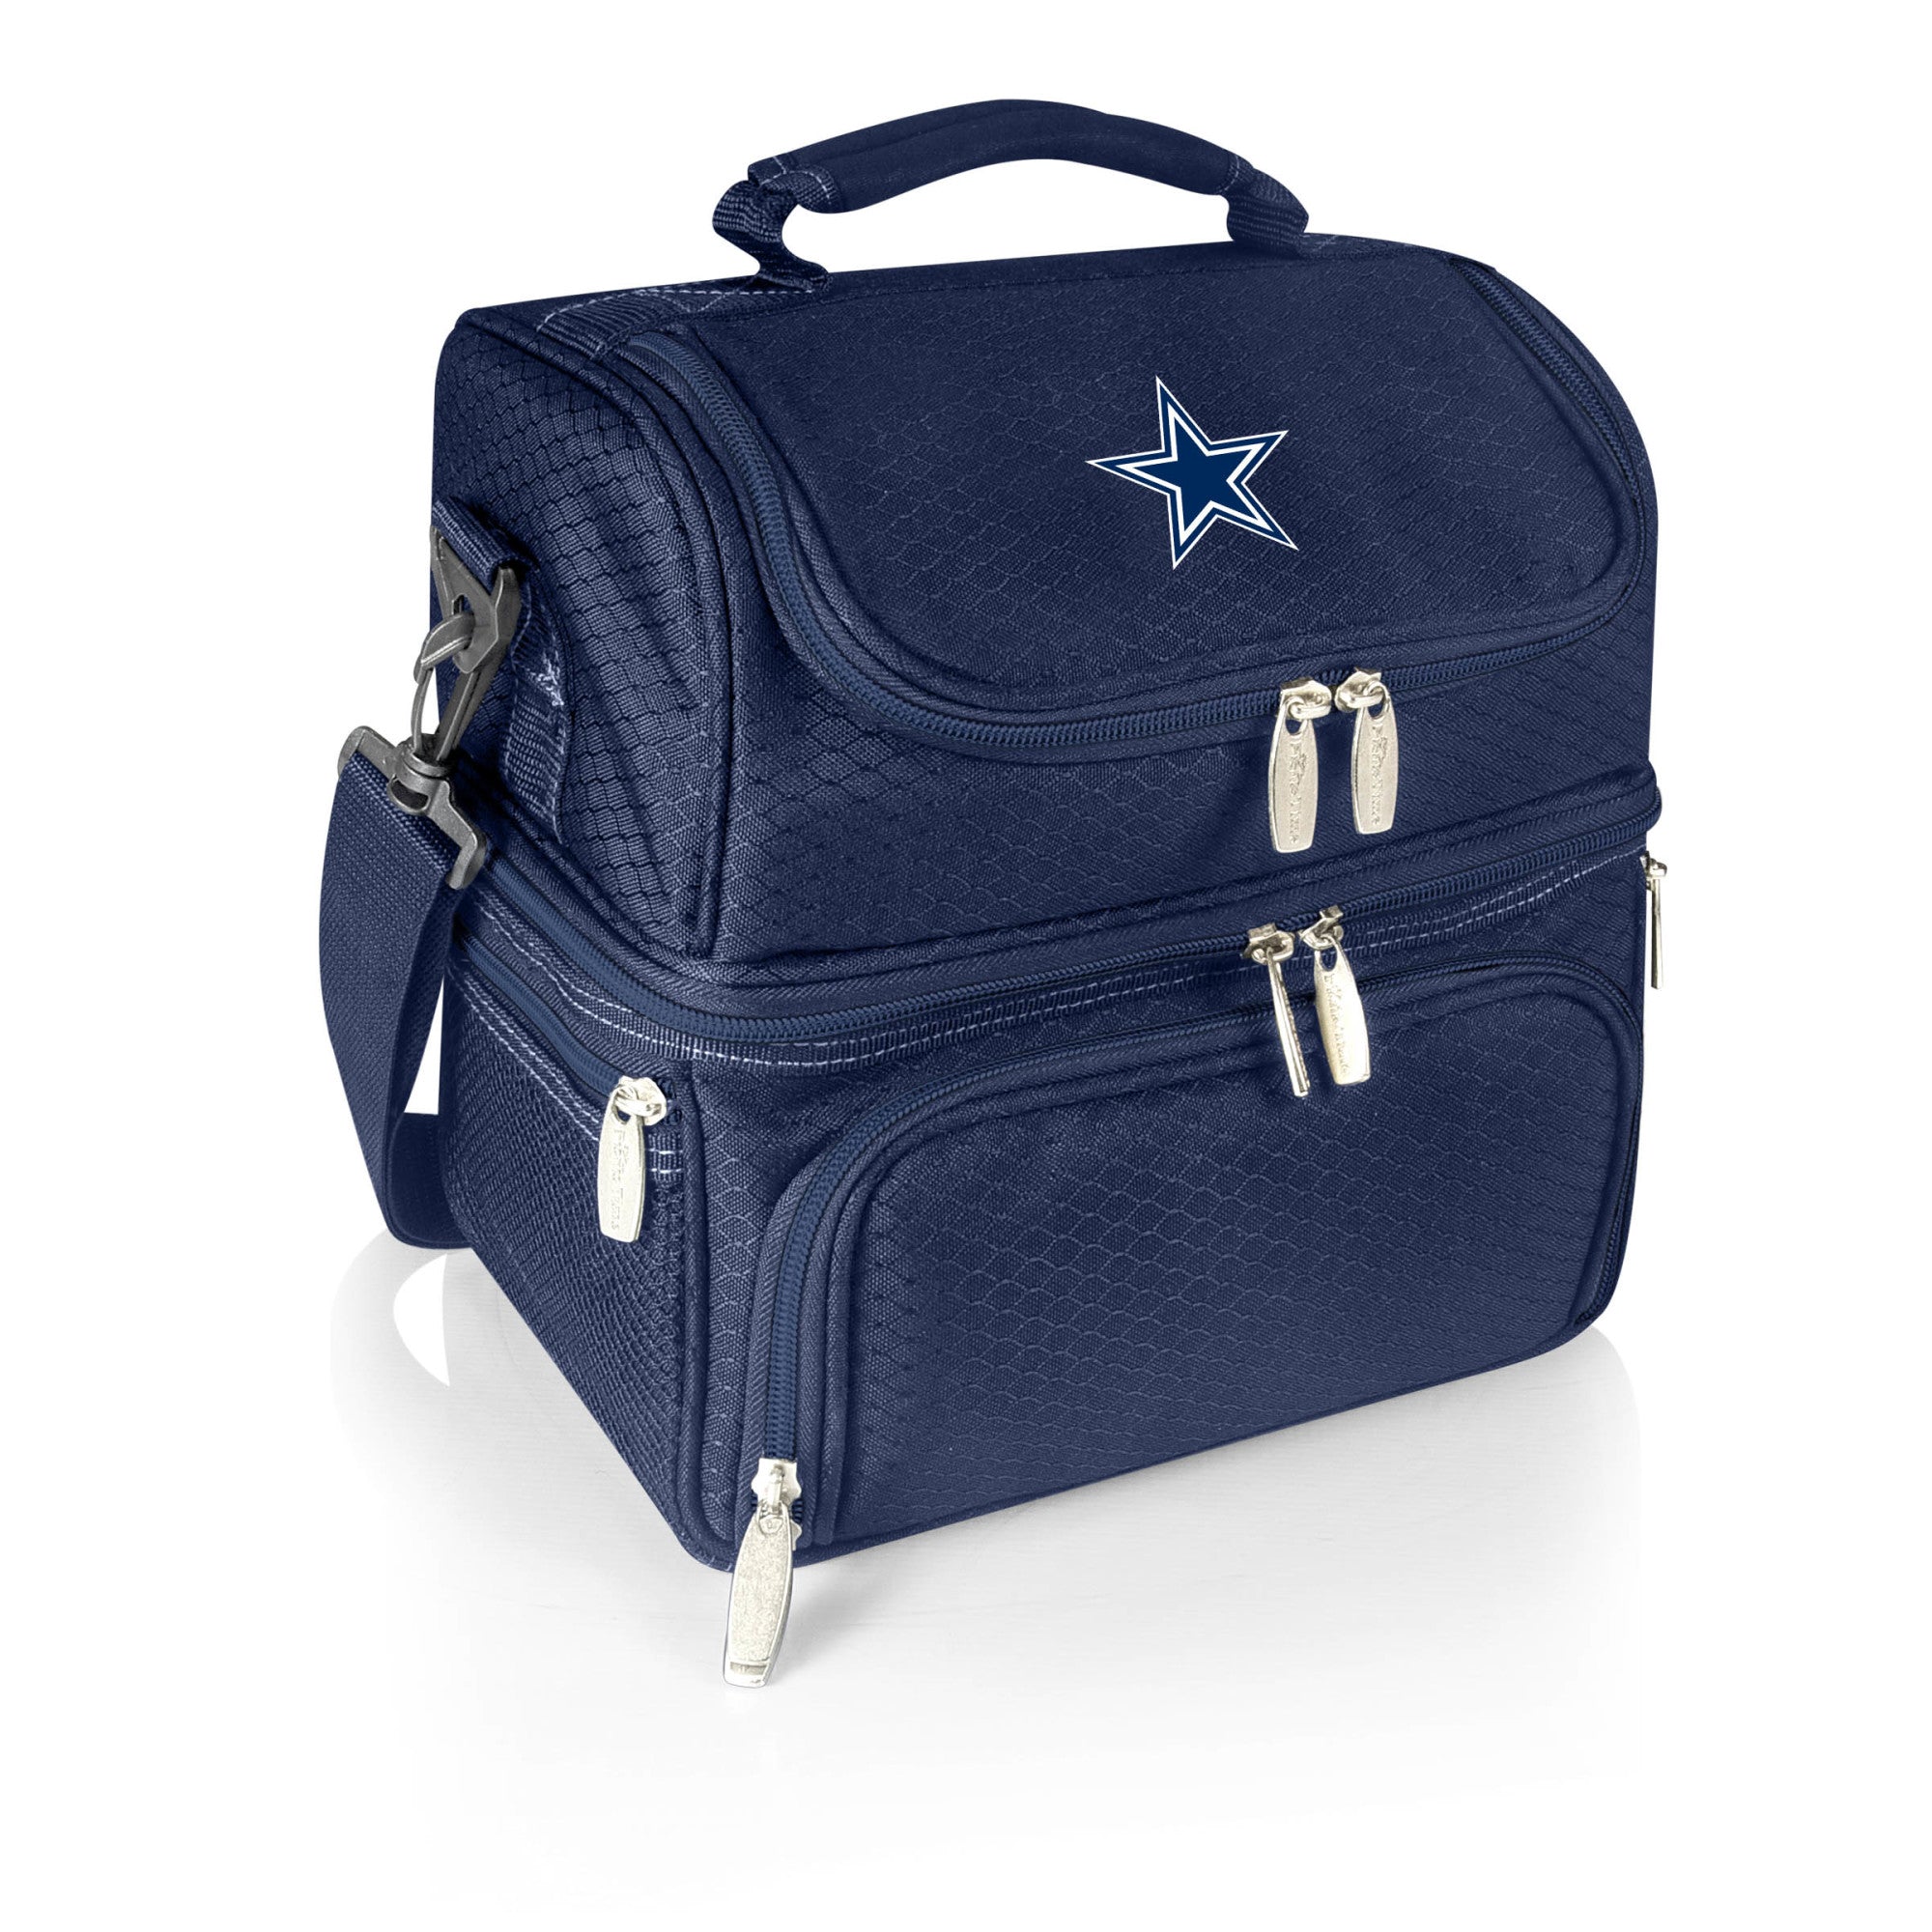 Dallas Cowboys - Pranzo Lunch Bag Cooler with Utensils